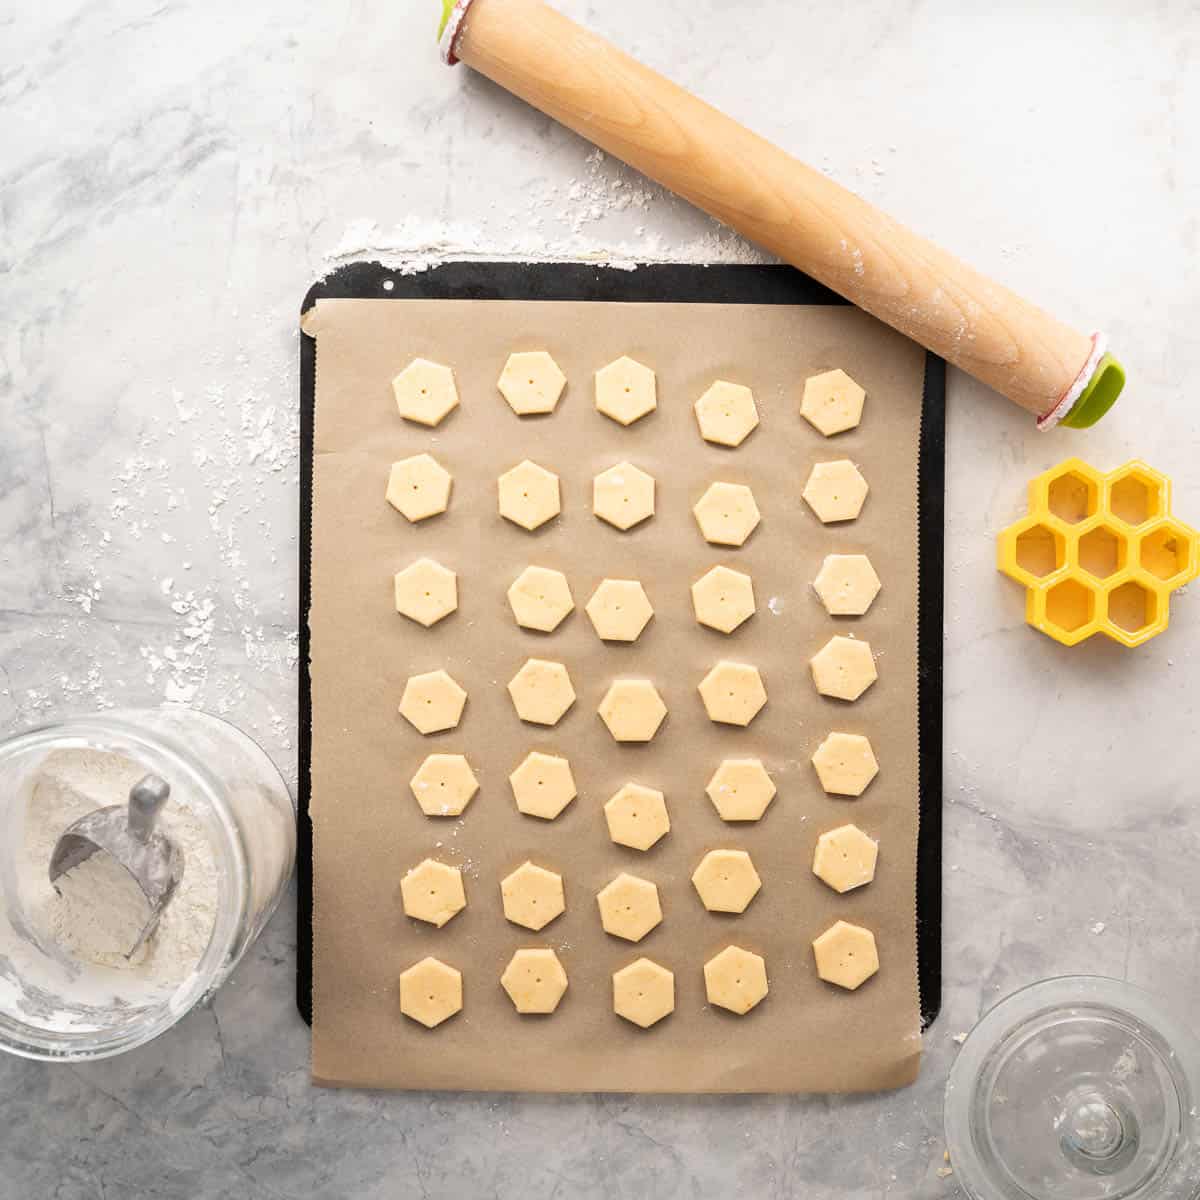 Small hexagon shaped crackers resting on a lined baking tray, ready for the oven